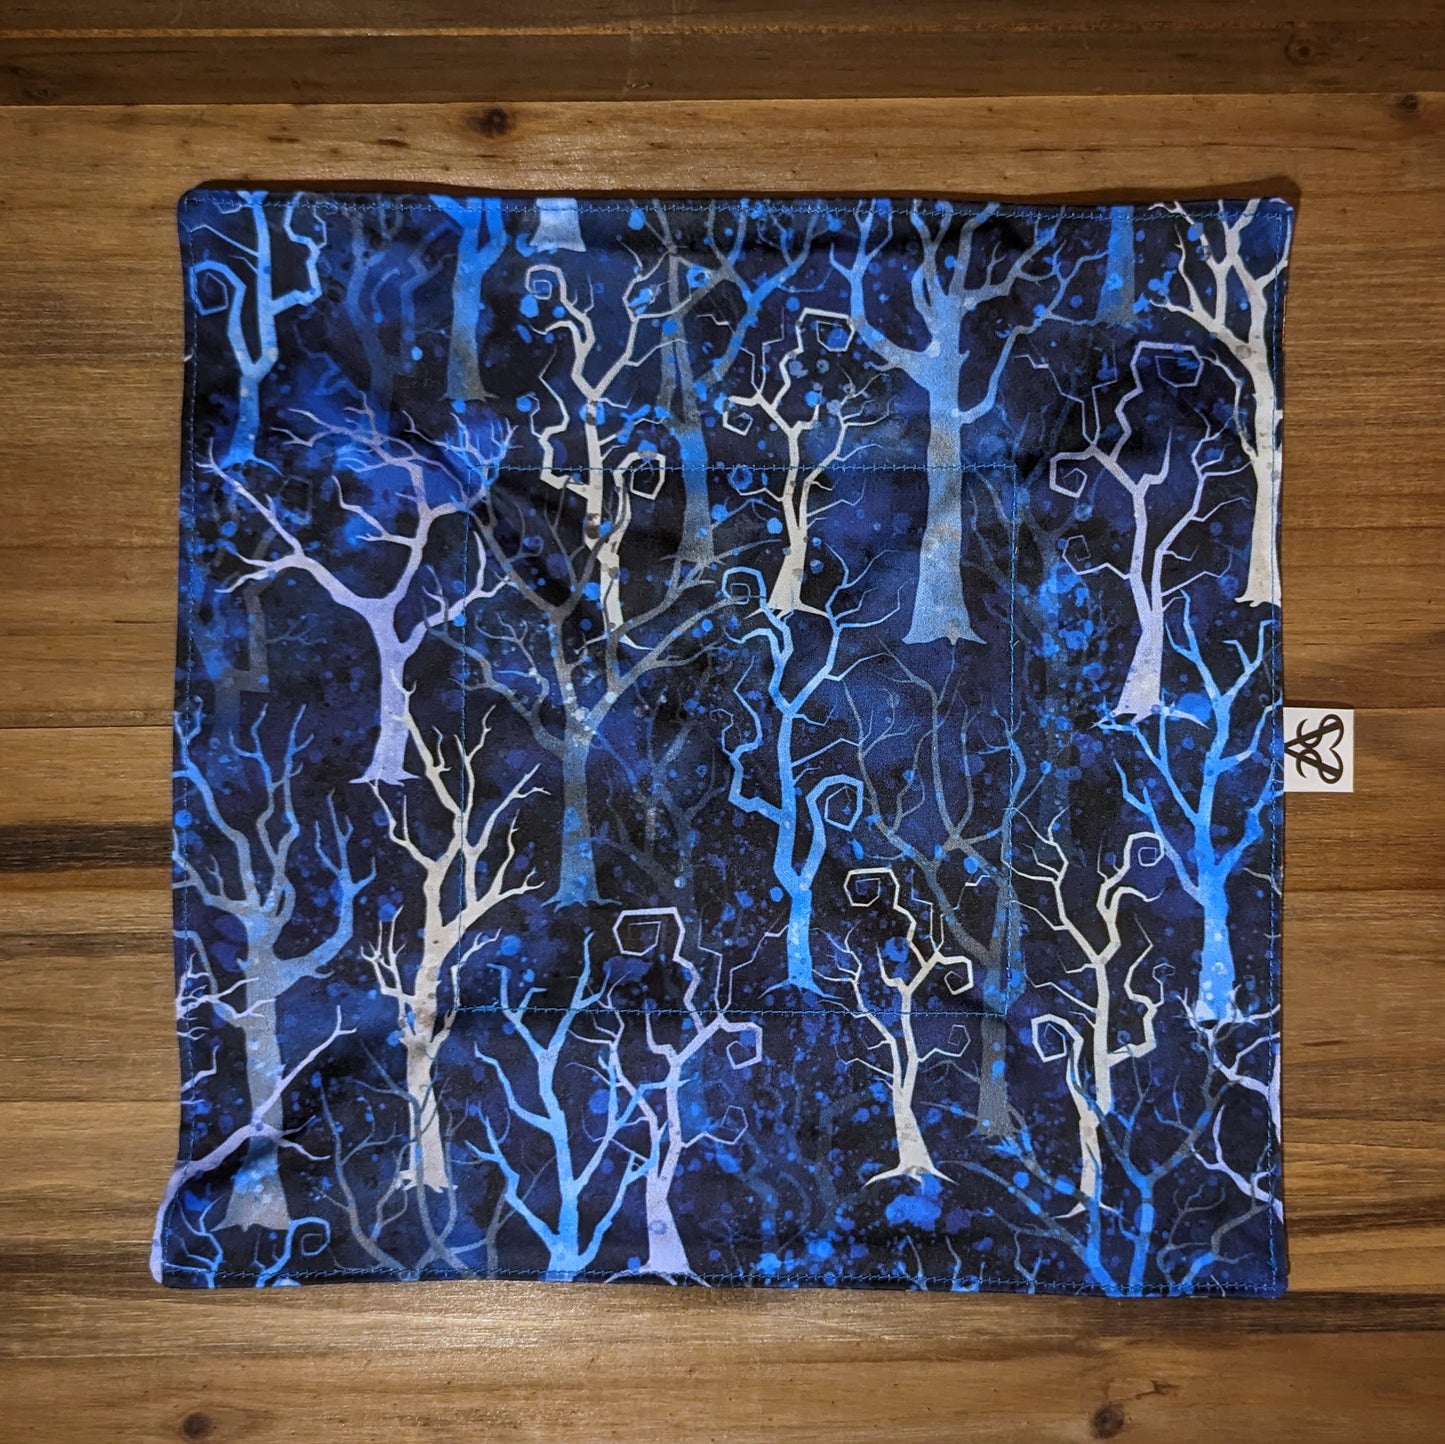 The witch's forest tray laid flat to show the spindly blue tone trees on the other side with the blue stitches that fade more into the blues of the pattern.